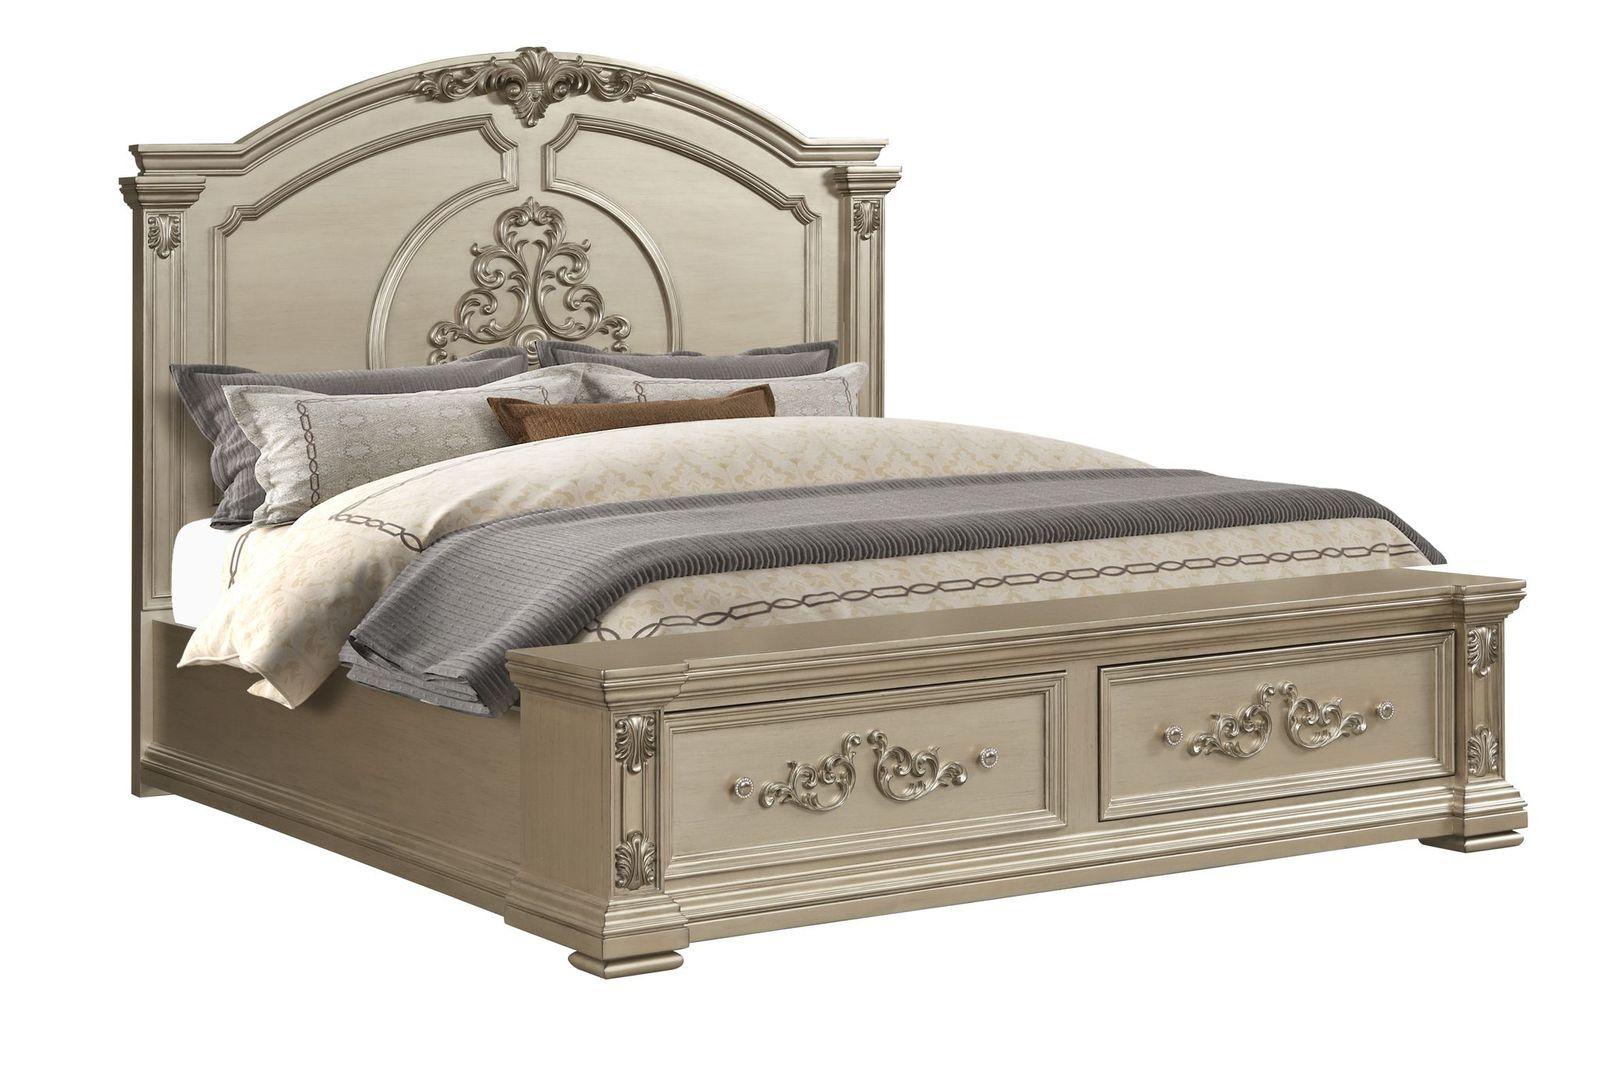 Transitional Panel Bed Alicia Alicia-Q-Bed in Beige 